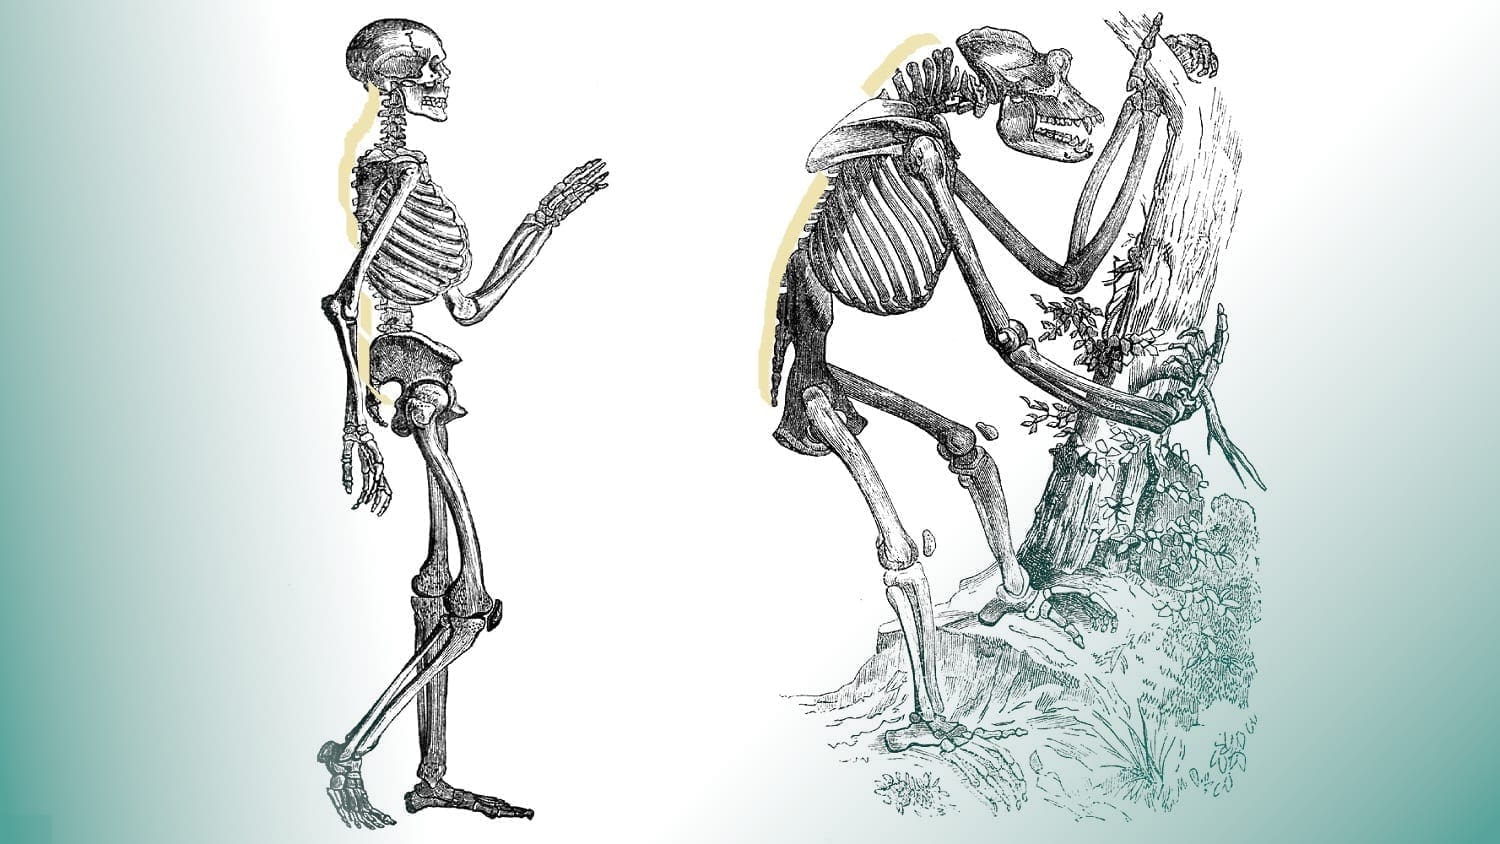 Drawings of Ape and Human Skeletons from 1859